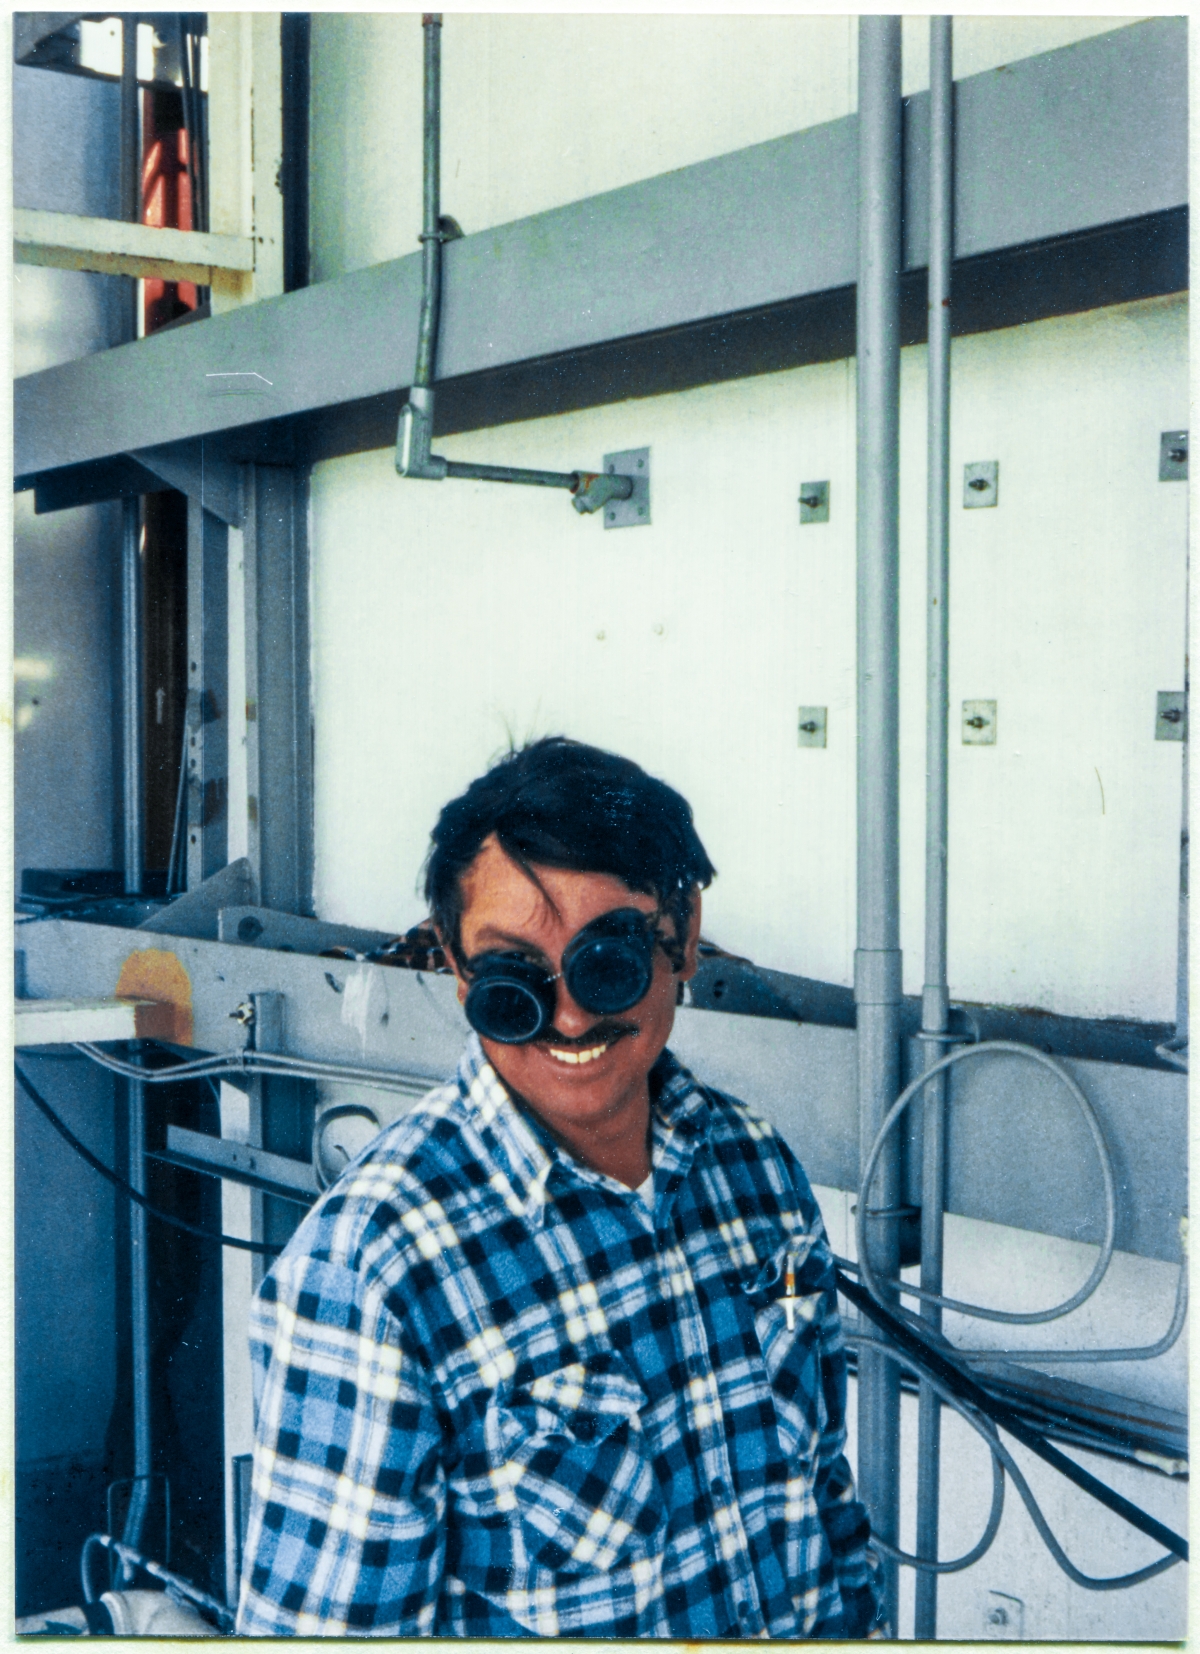 Image 065. Ironworker Gene Lockamy out of the Local 808 Union Hall working for Ivey's Steel Erectors at Space Shuttle Launch Complex 39-B, Kennedy Space Center, Florida, takes a momentary break from his work modifying the Rotating Service Structure in the area of the Girts which hold up the insulated metal paneling along the back side of the Payload Changeout Room, and unexpectedly pulls his cutting-torch goggles down at an absurd angle to laughingly oblige the photographer's request for an on-the-job photograph, up on high steel. Photograph by James MacLaren.